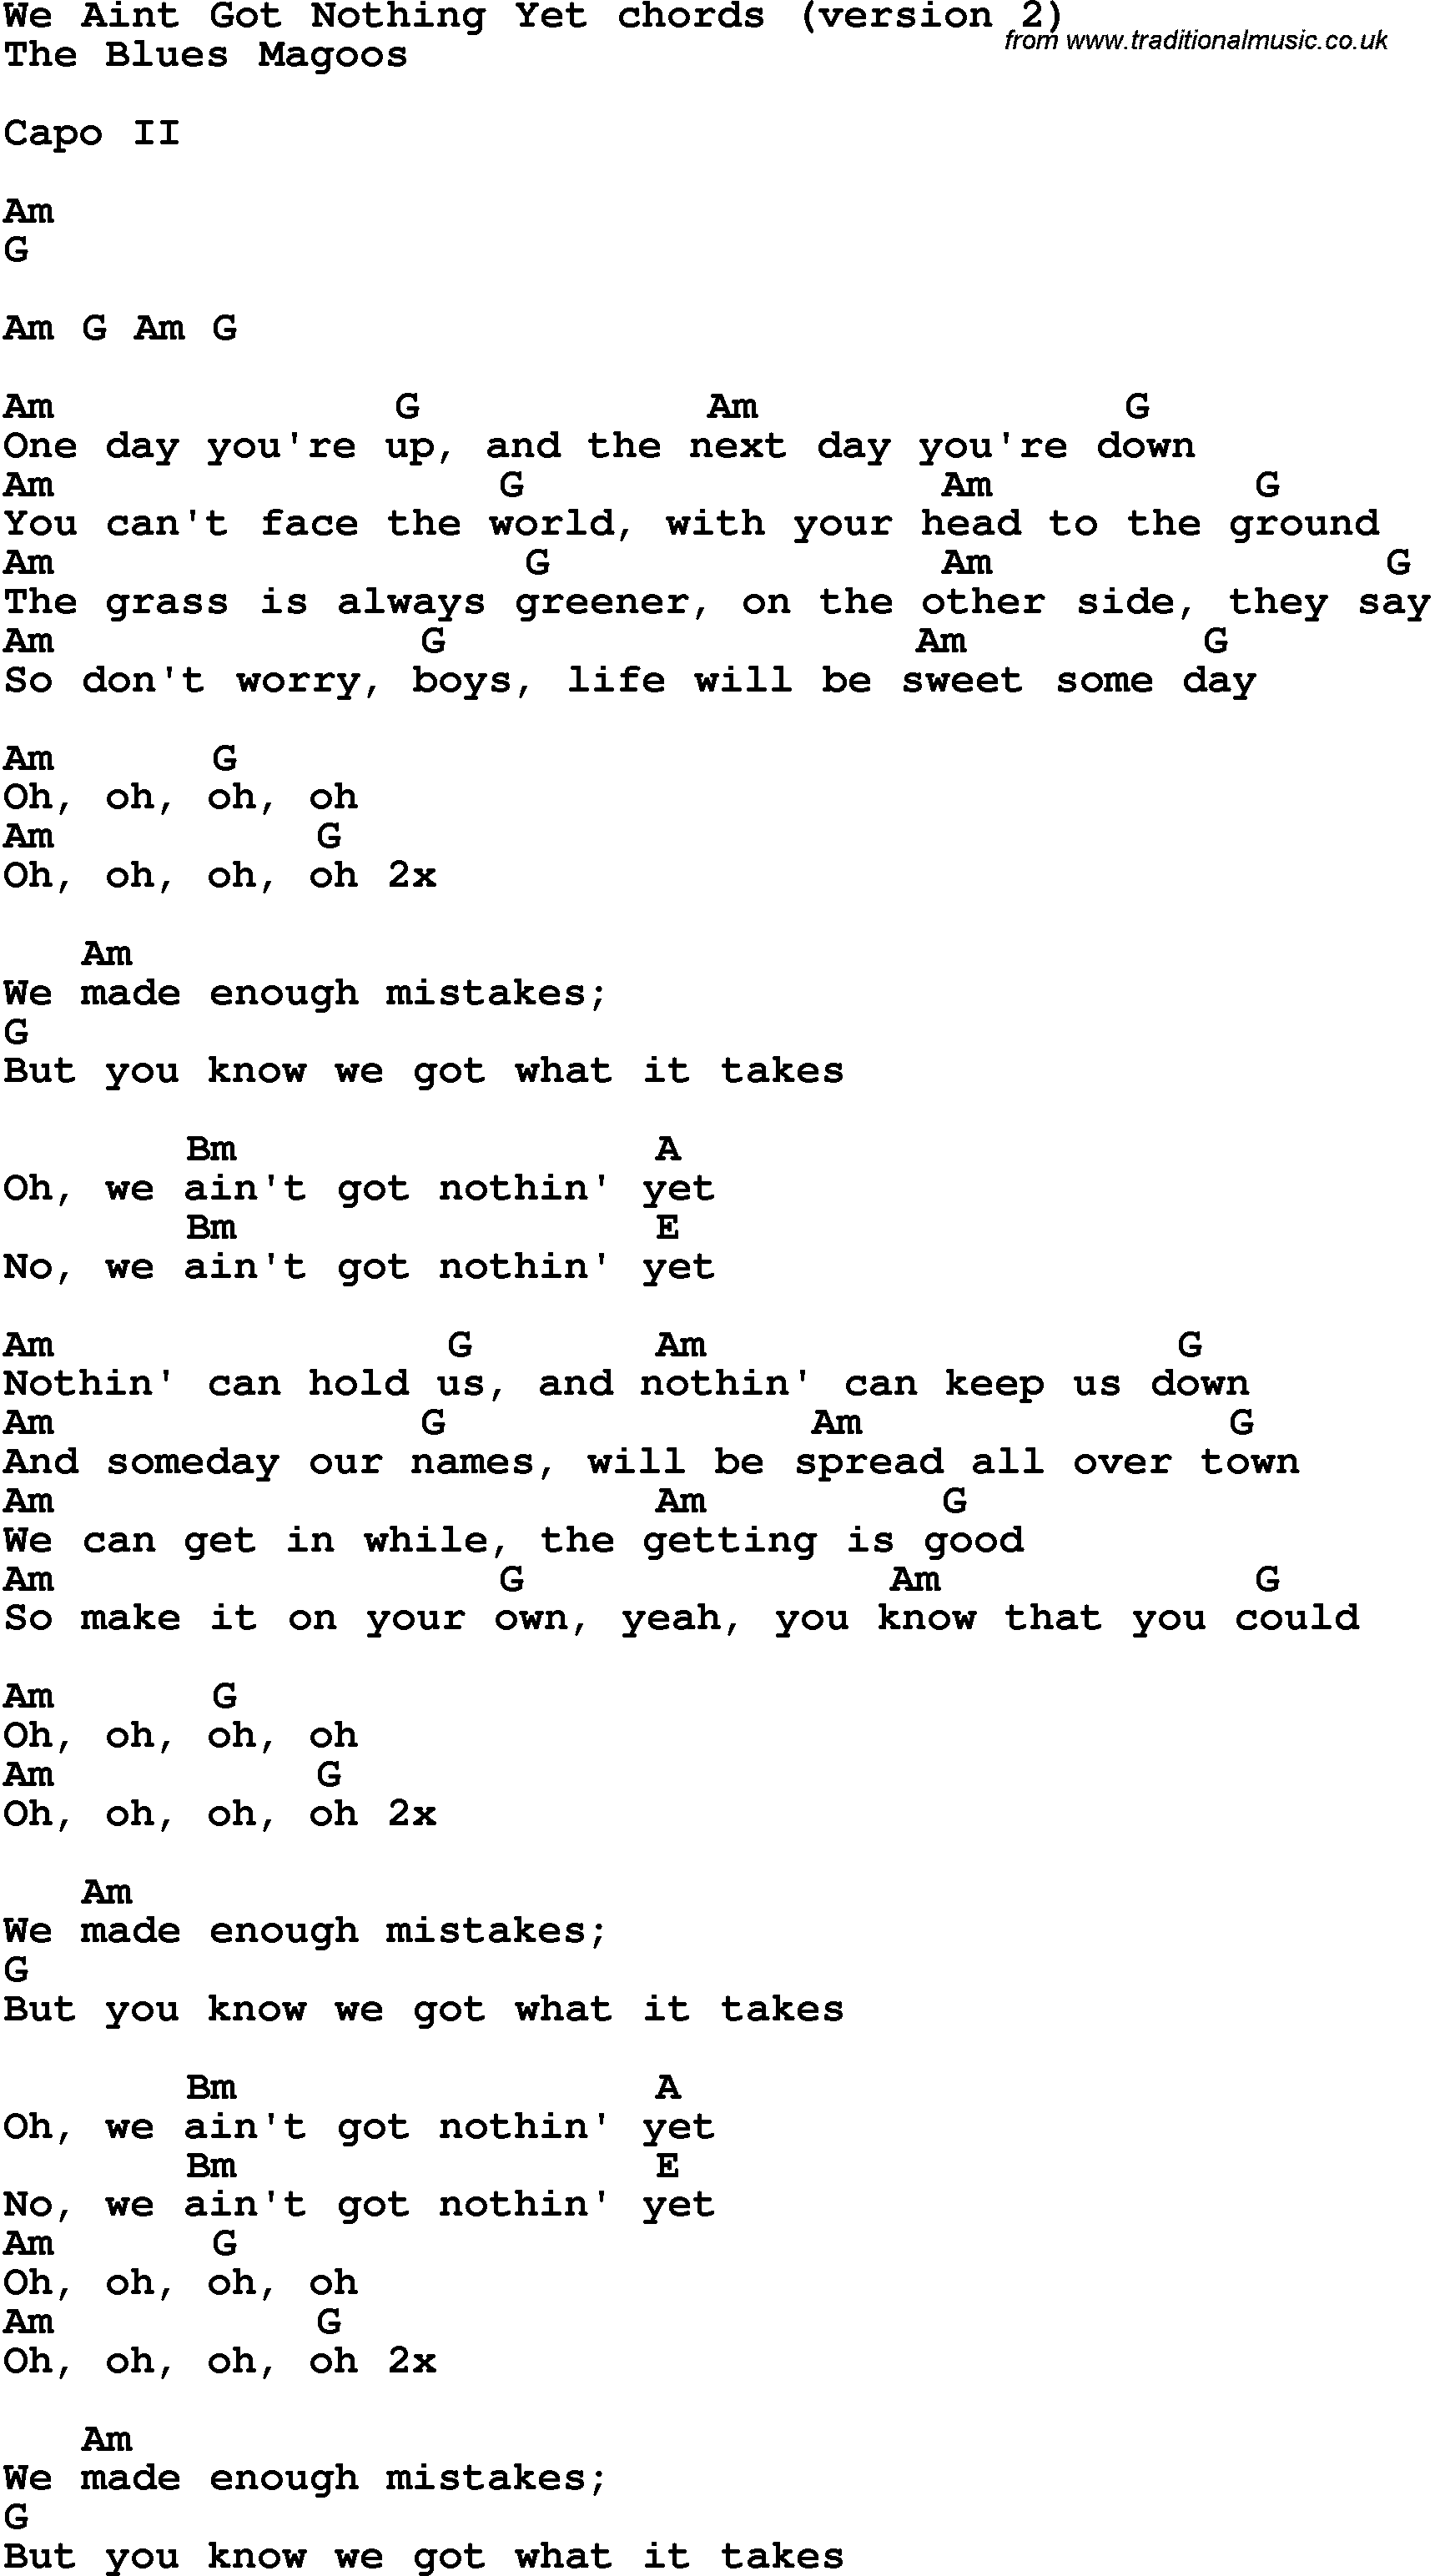 Song Lyrics with guitar chords for We Ain't Got Nothing Yet - The Blues Magoos